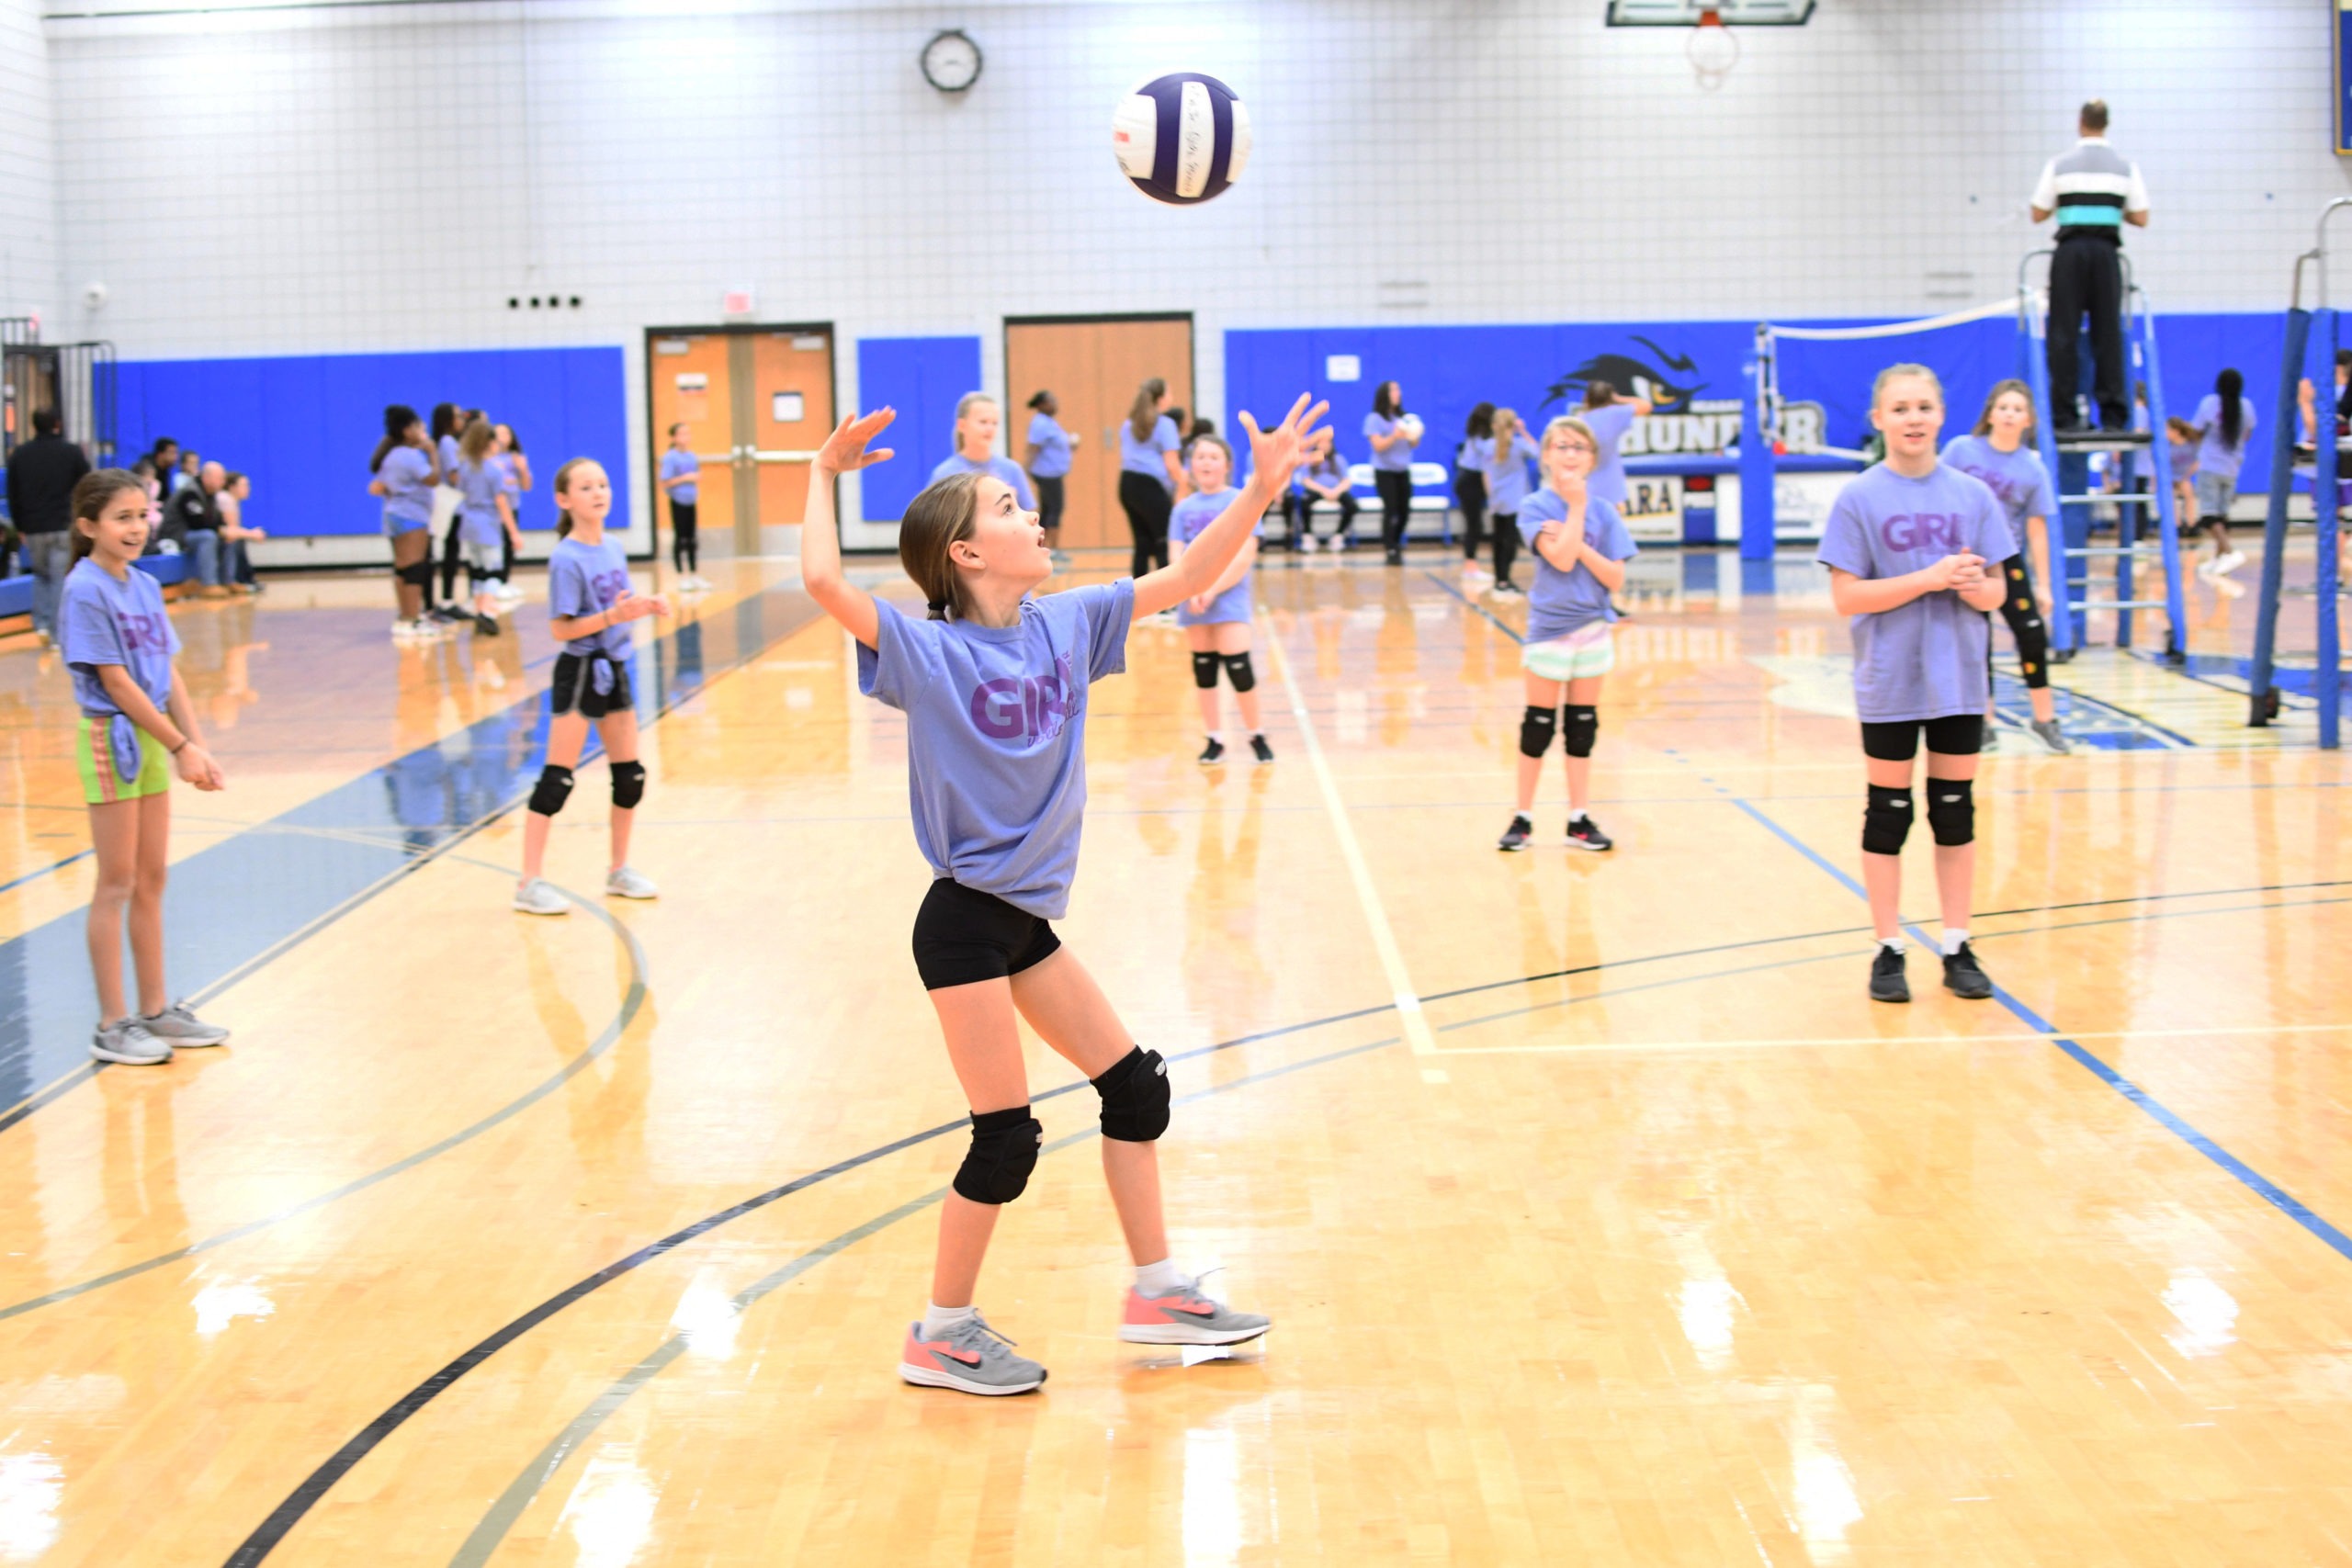 Girl Power Volleyball Tournament Held at NCCC